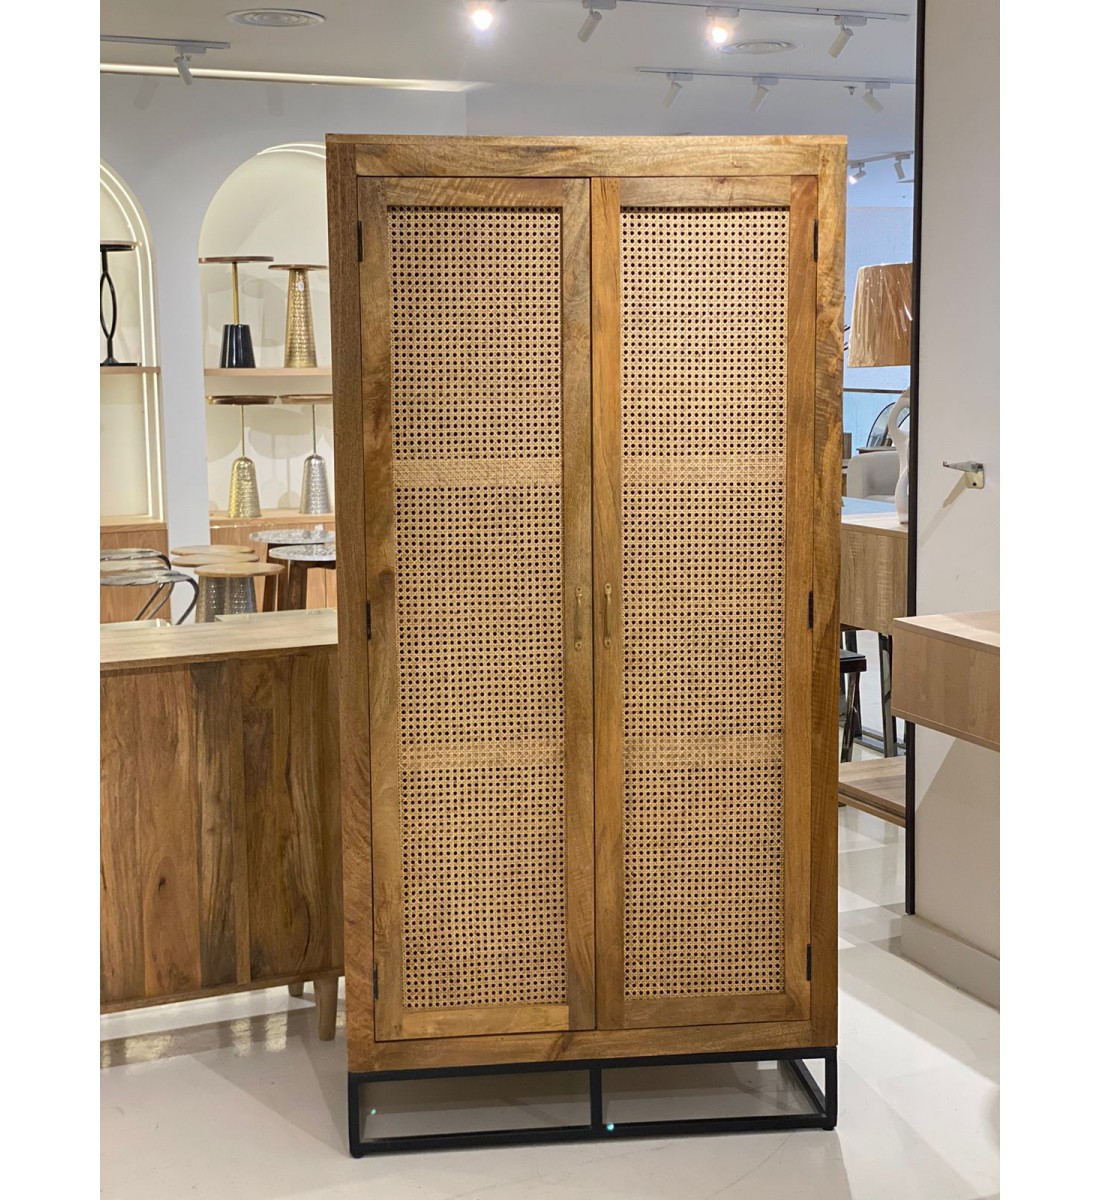 A side cabinet or cupboard for abayas, rattan and luxurious wood, 180 * 90 cm